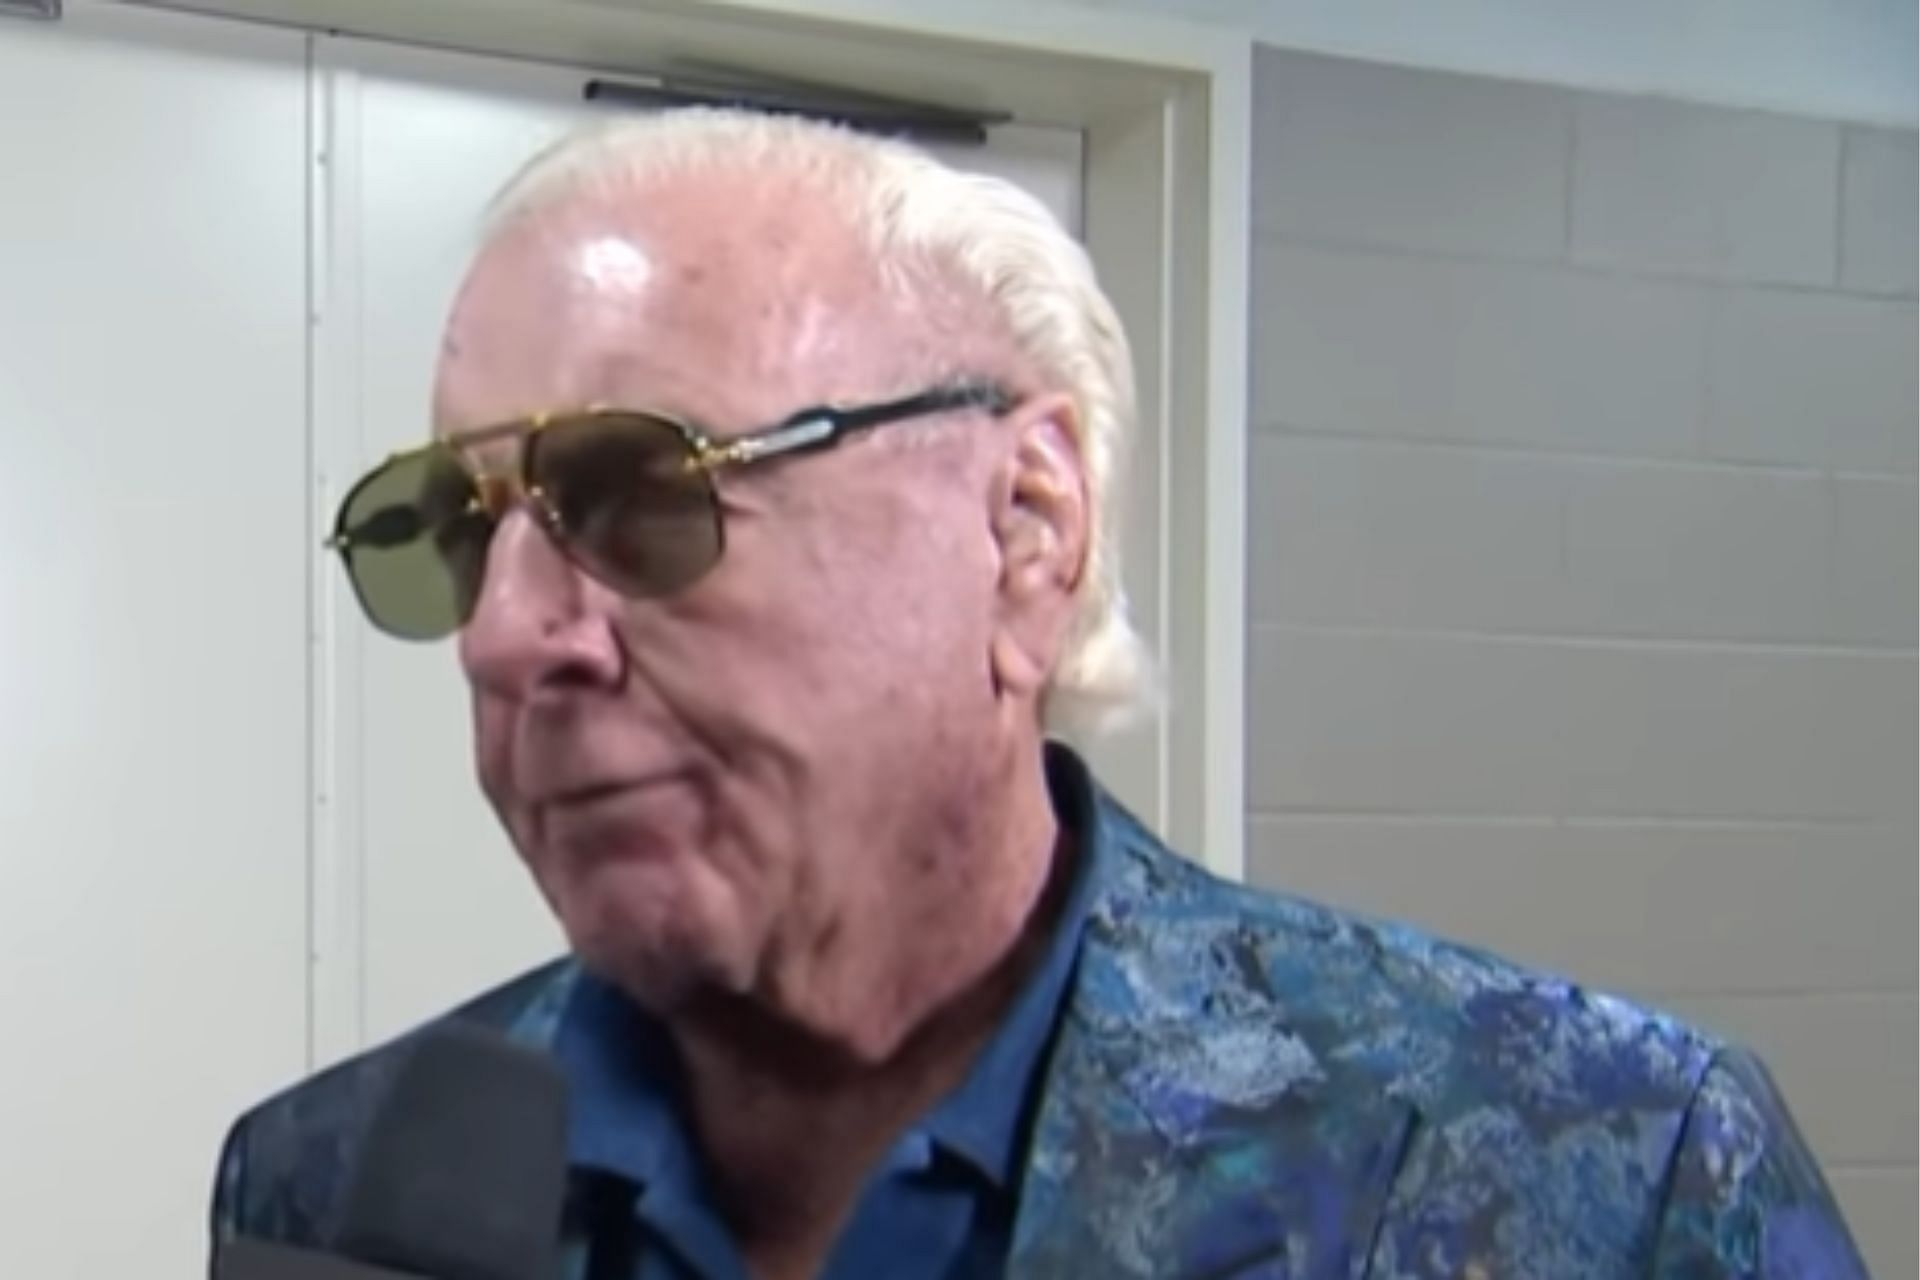 Ric Flair gets emotional on his son